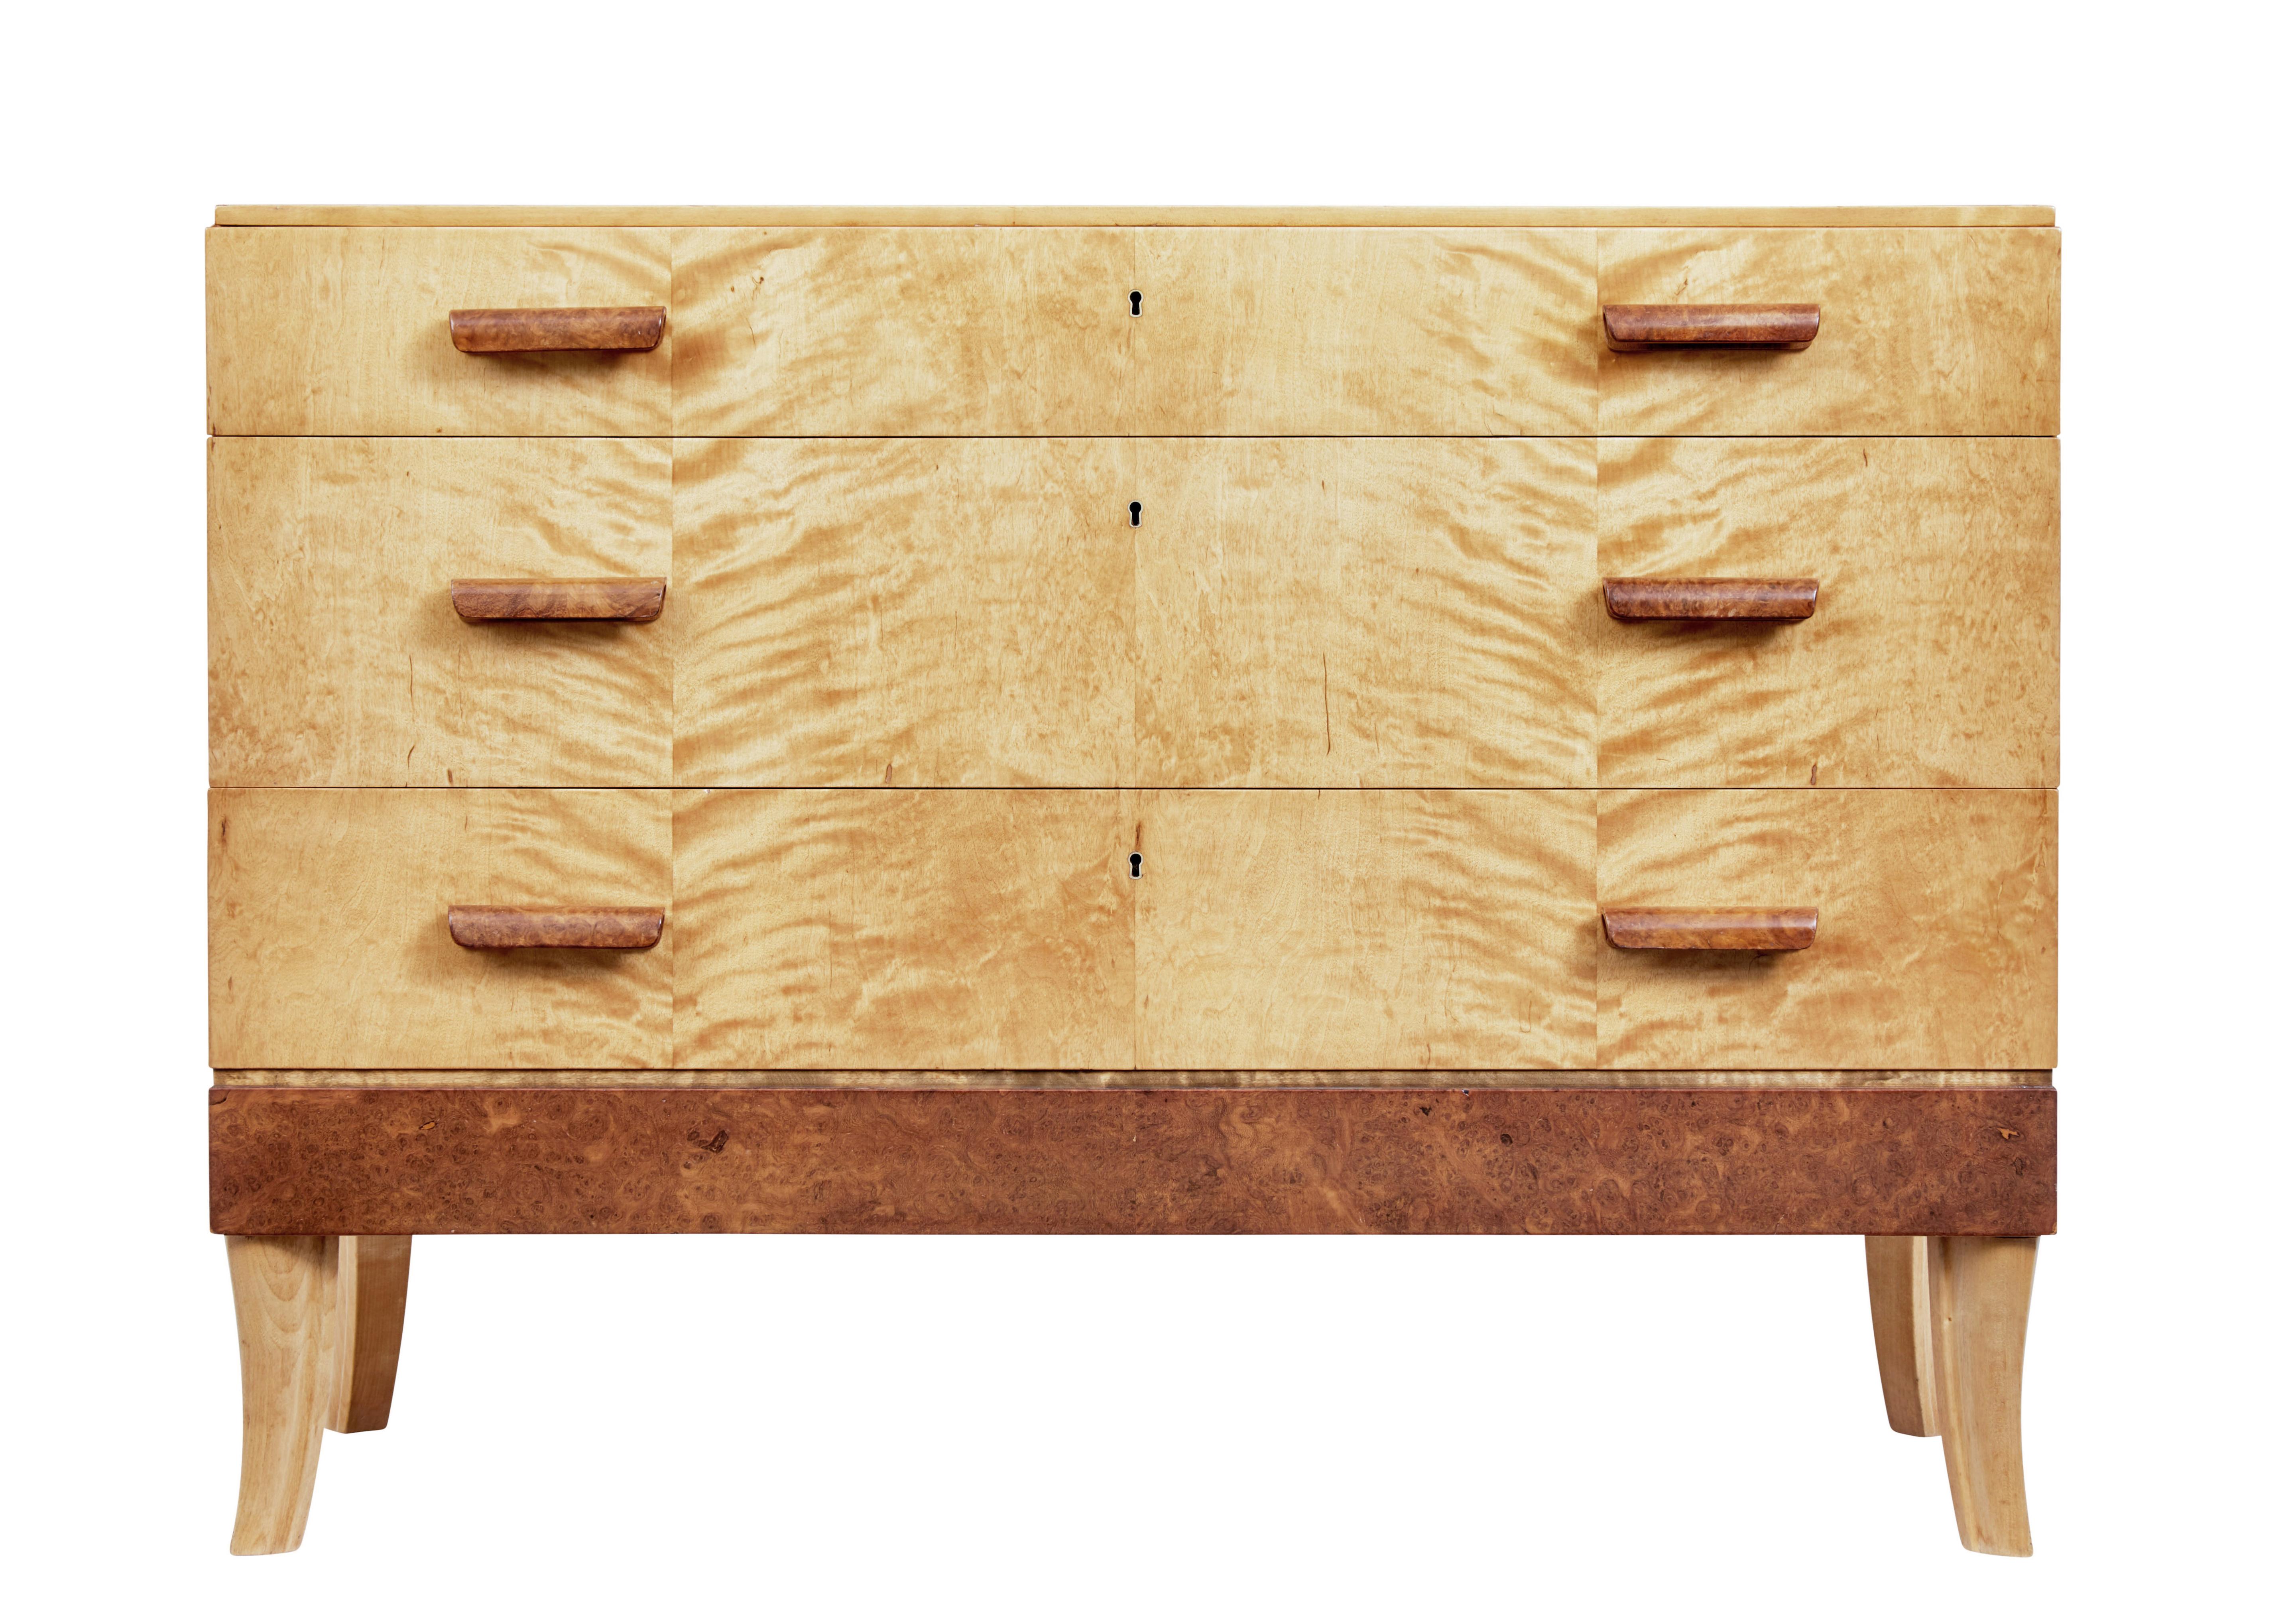 Mid 20th century burr birch Scandinavian chest of drawers circa 1950.

3 drawers fitted with burr shaped handles, top drawer fitted with partitions and fitted turned bowl for jewellery etc.

Handles and bottom burr panel add contrast to the